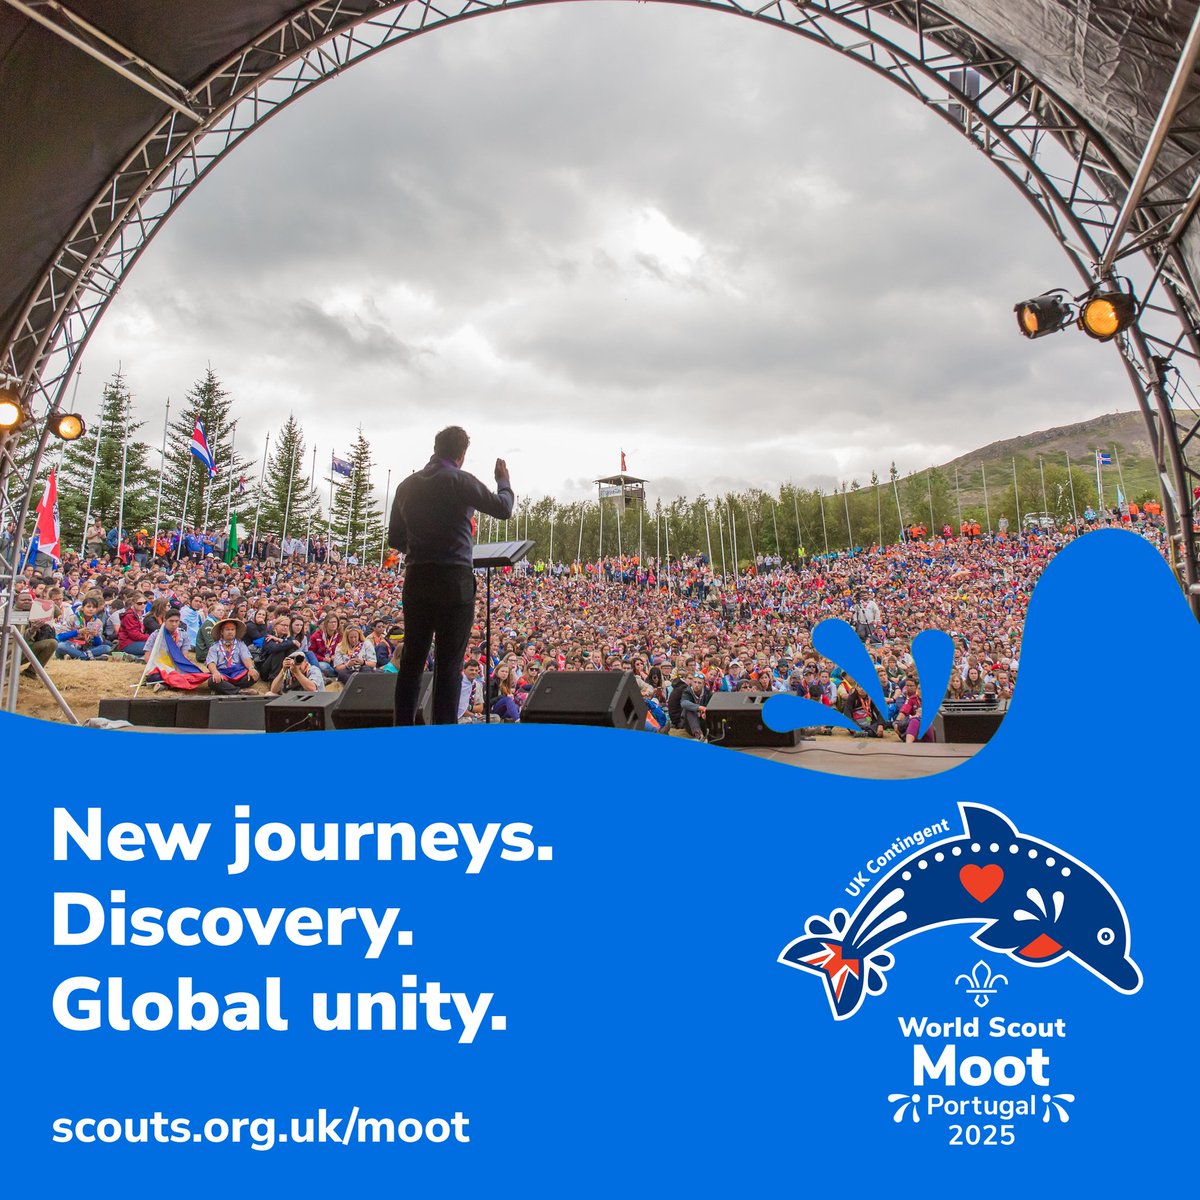 Are you looking to have a fin-tastic time exploring Portugal? Are you looking for the opportunity to discover global unity with other scouters from across the world? Apply to be a part of the UK pod at the 2025 World Scout Moot in Portugal! Apply Now - scouts.org.uk/moot